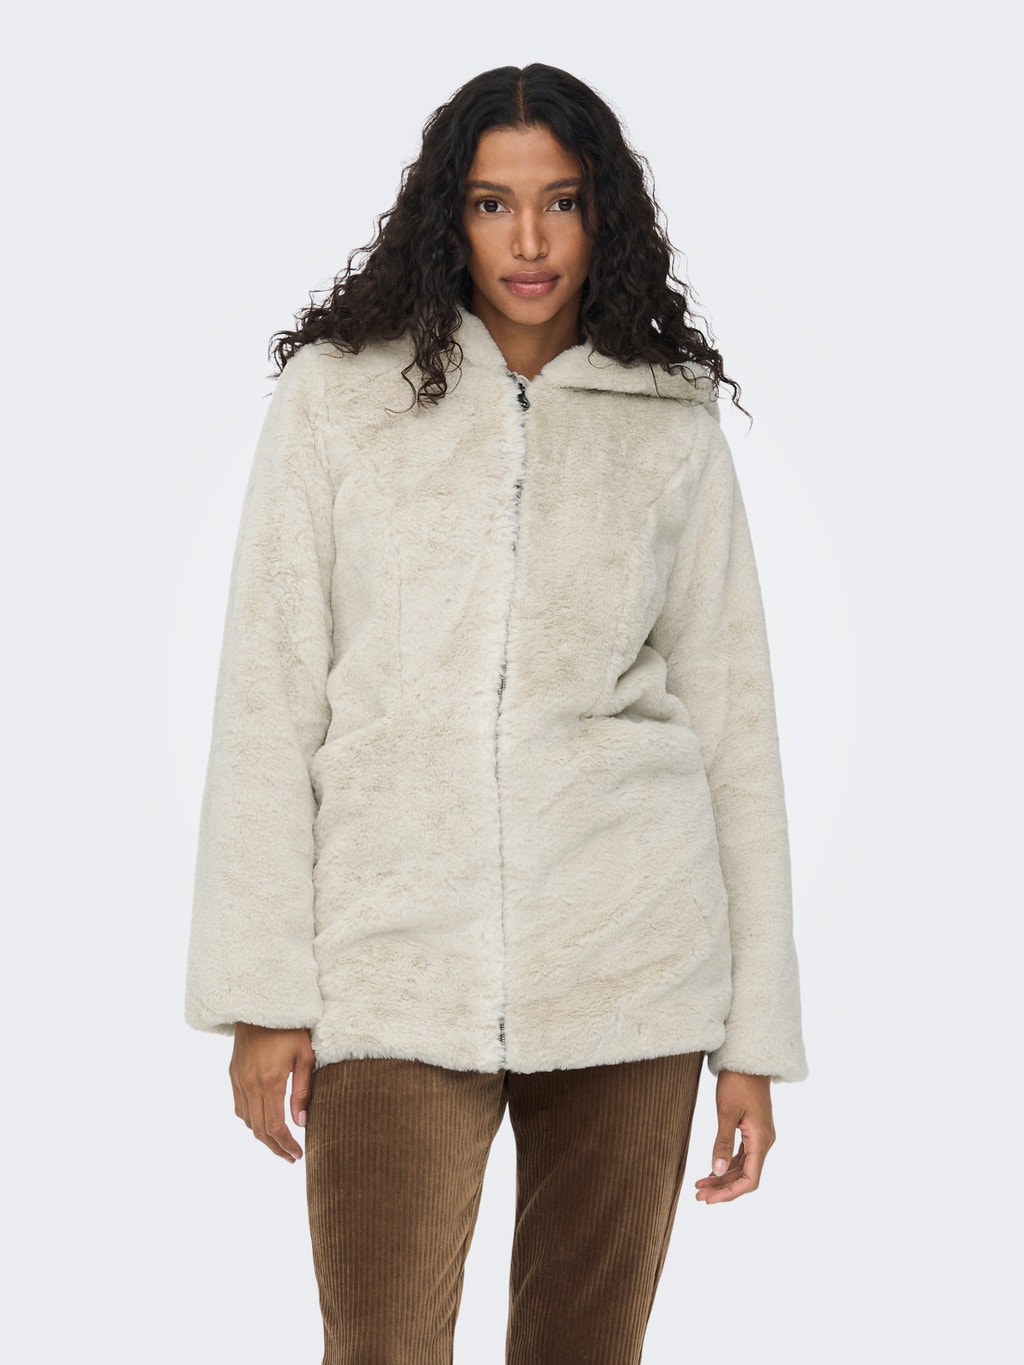 Marty Fielding Poëzie Vrijwillig Faux fur Jacket with 40% discount! | ONLY®